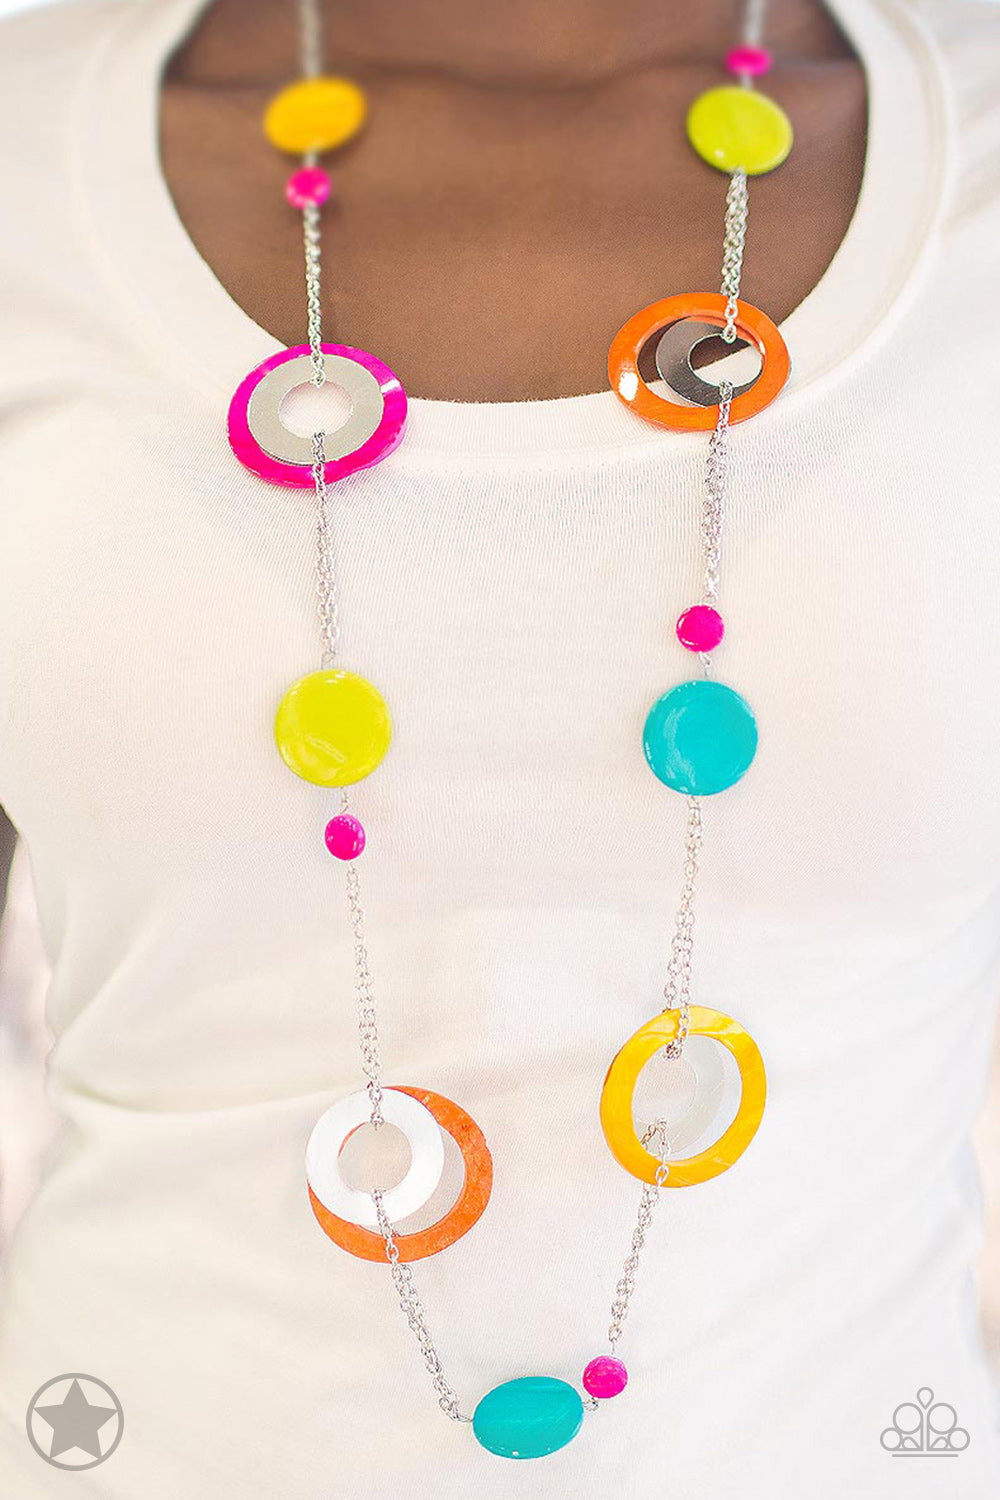 Kaleidoscopically Captivating - Multi Color Necklace - Paparazzi Accessories - Casual and colorful fashion necklace. It has chunky brightly-colored rings and discs with swirly marble finishes join thick metal hoops to climb a simple silver chain and create a retro style.